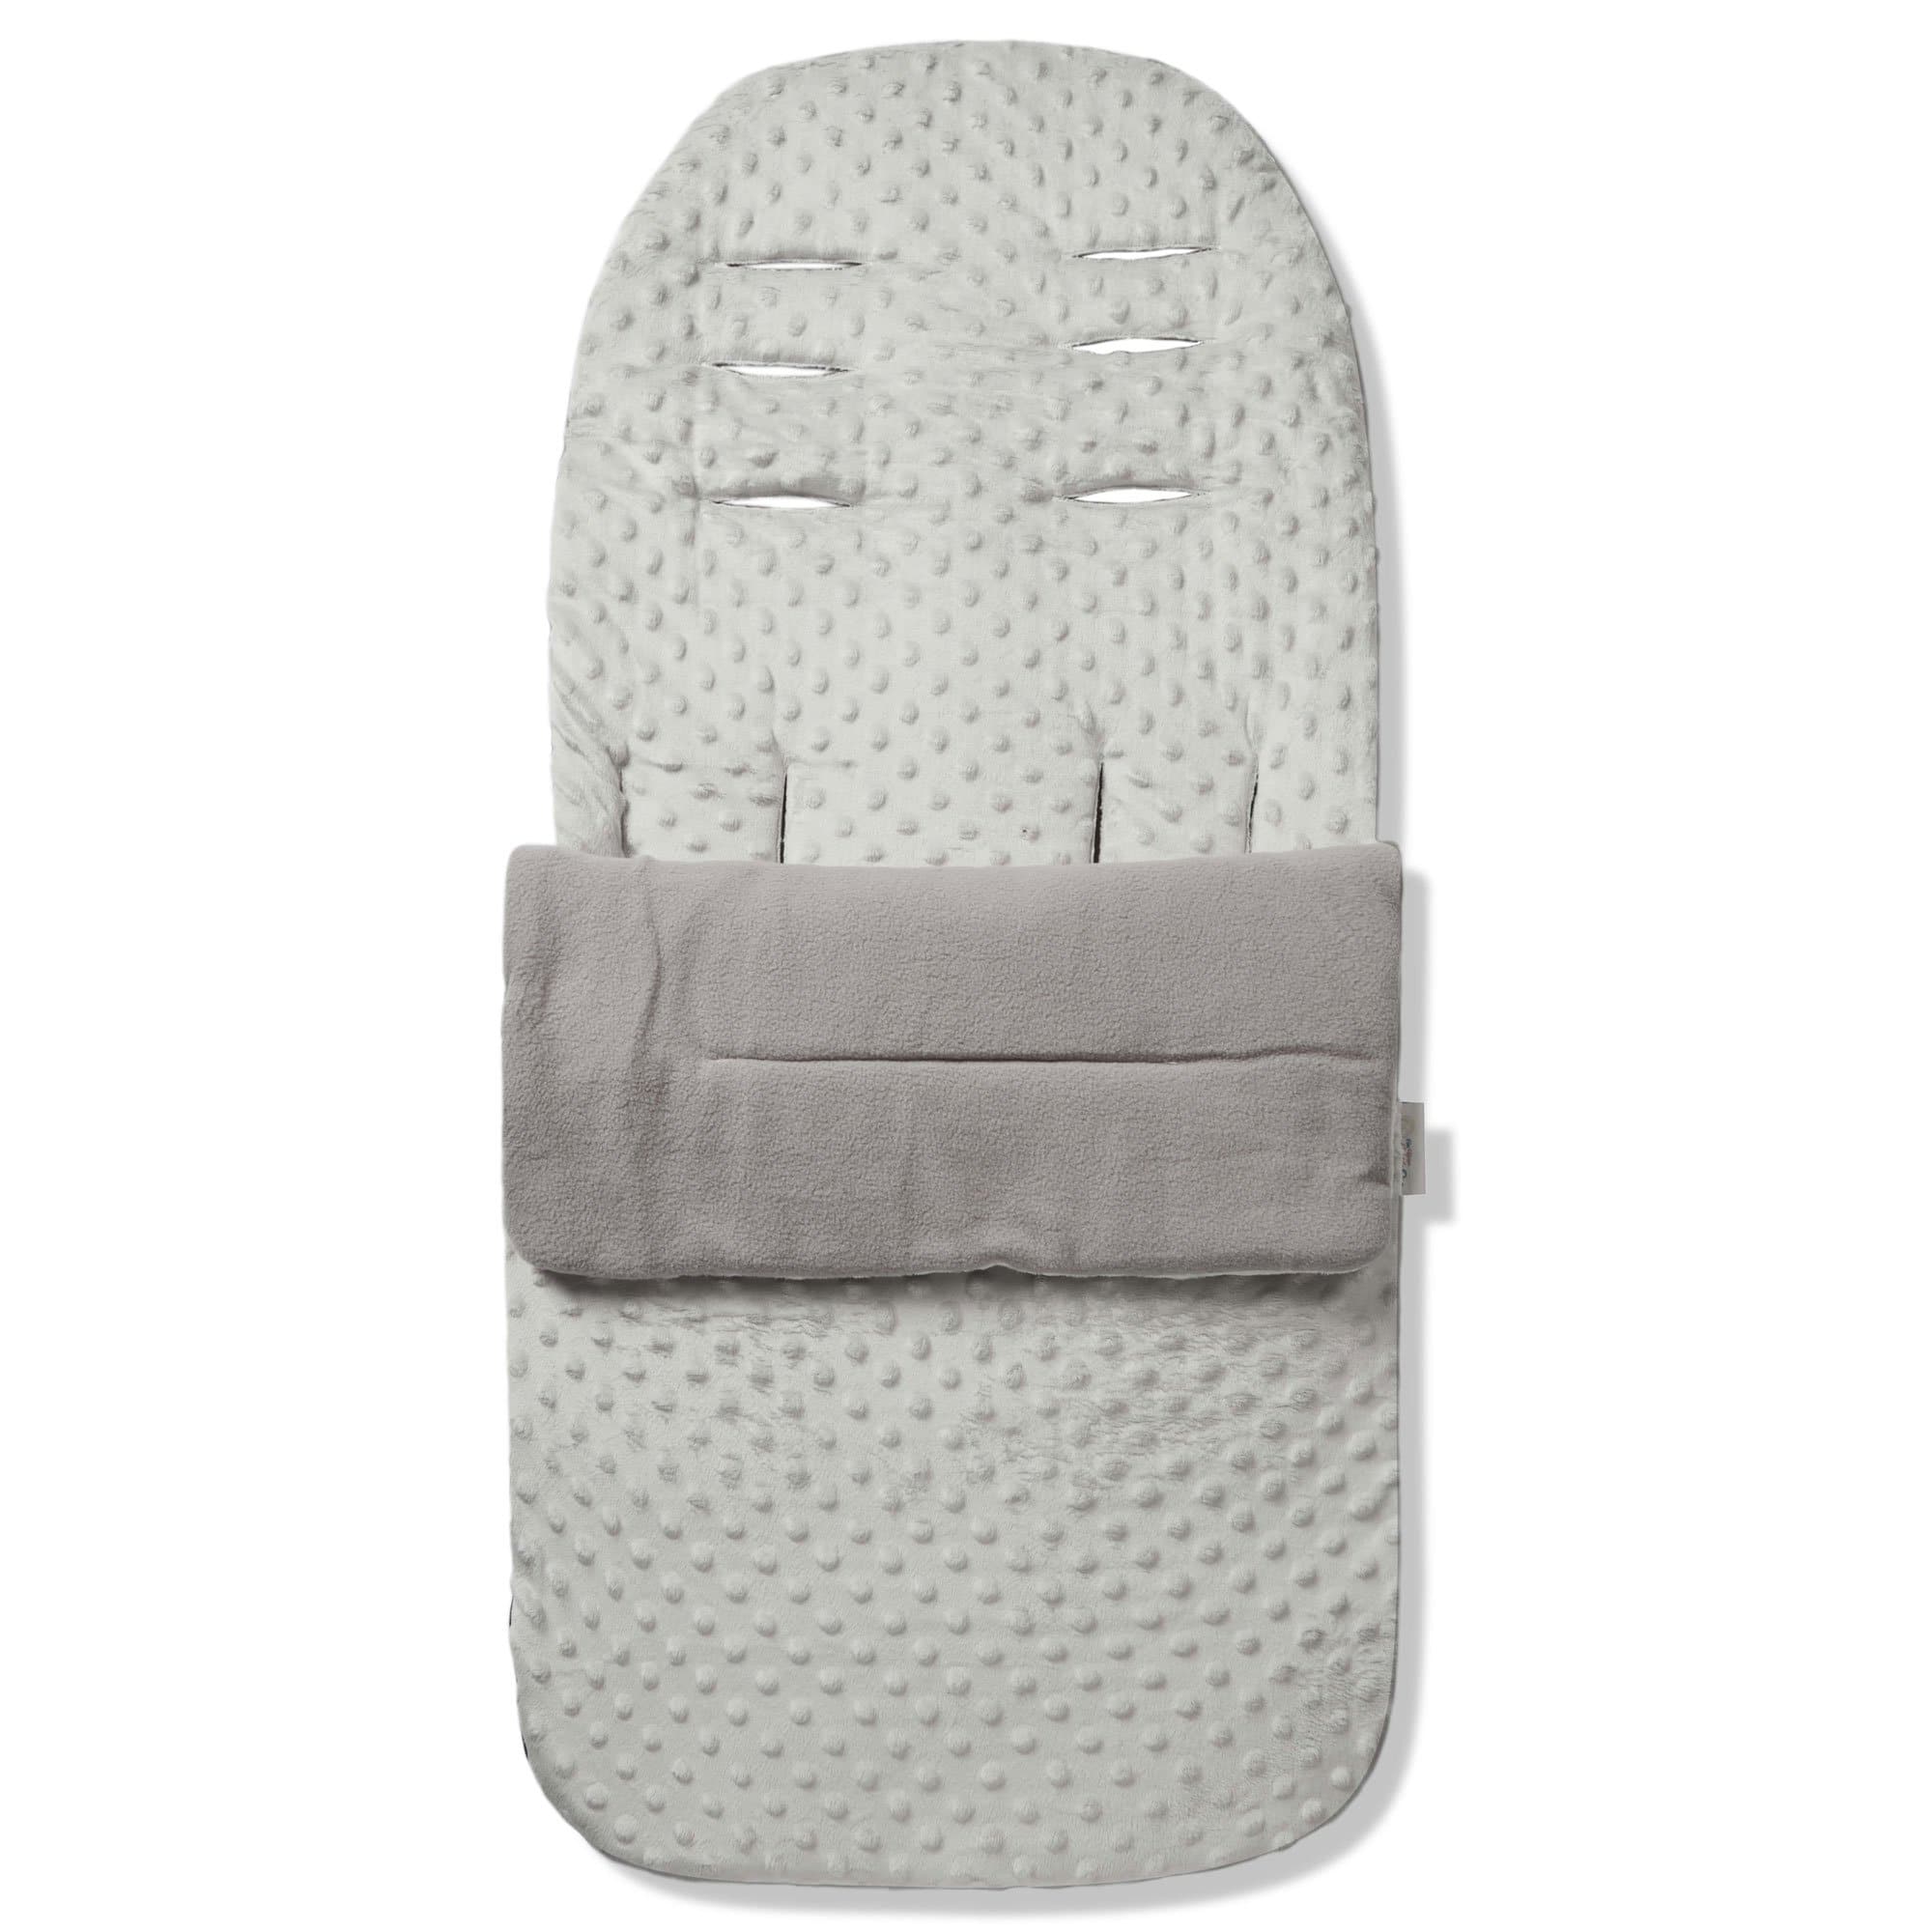 Dimple Footmuff / Cosy Toes Compatible with Hartan - Grey / Fits All Models | For Your Little One